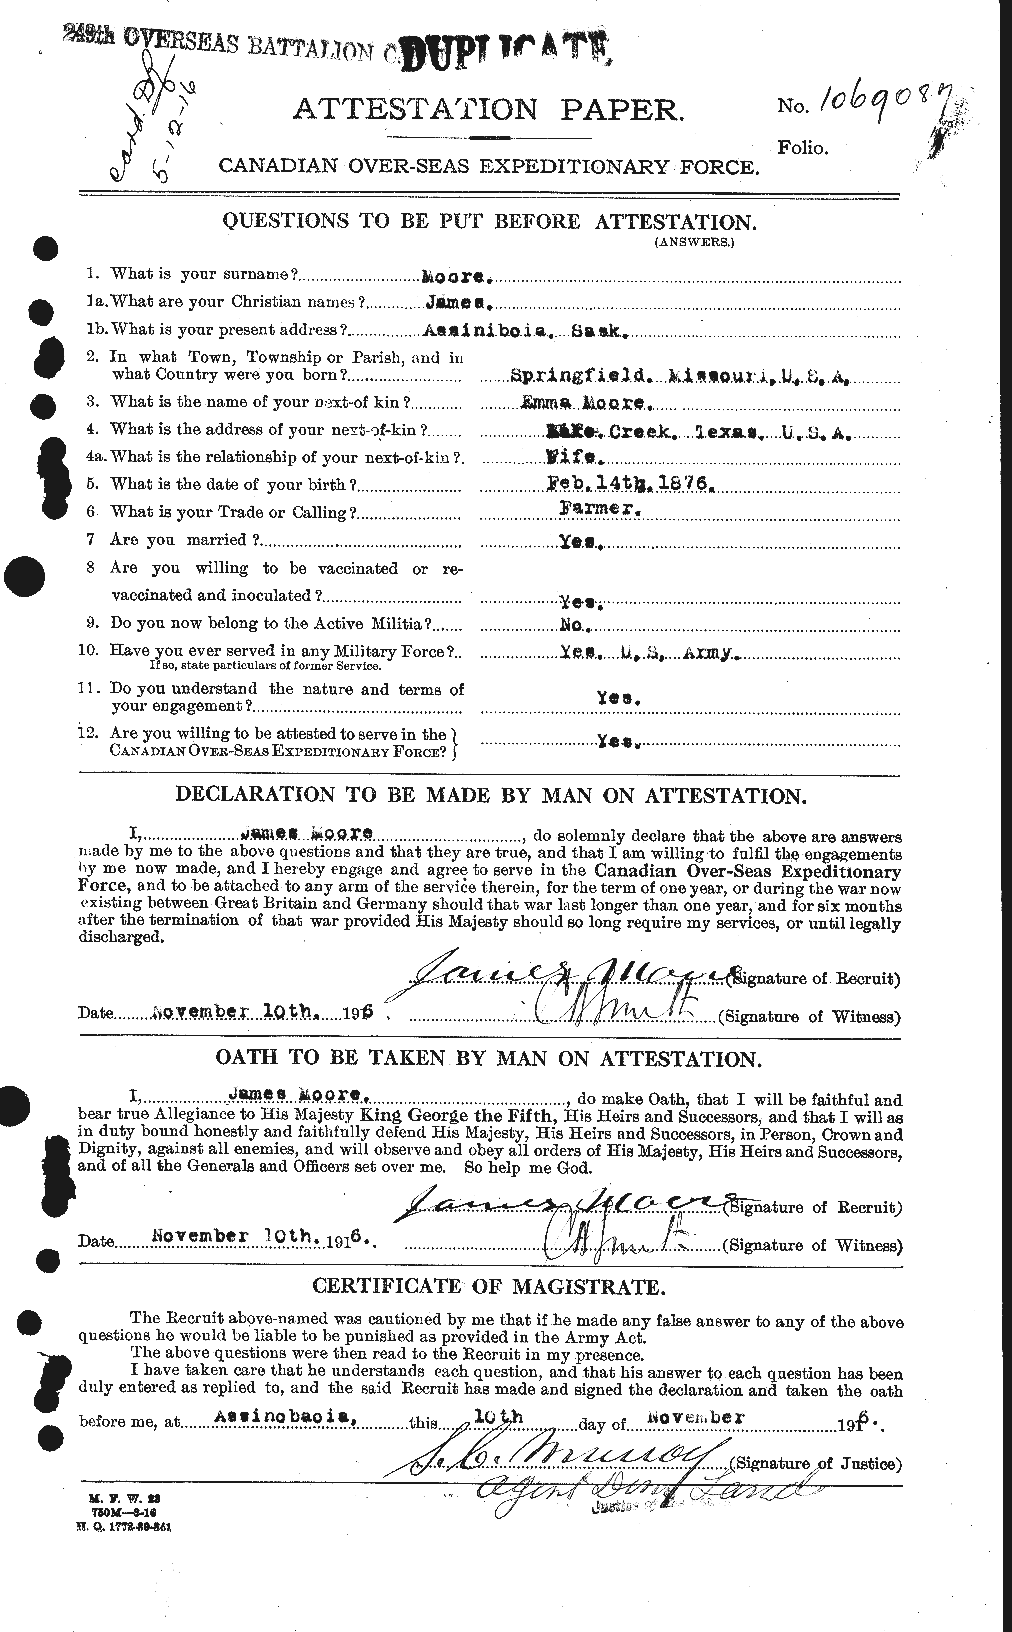 Personnel Records of the First World War - CEF 502171a